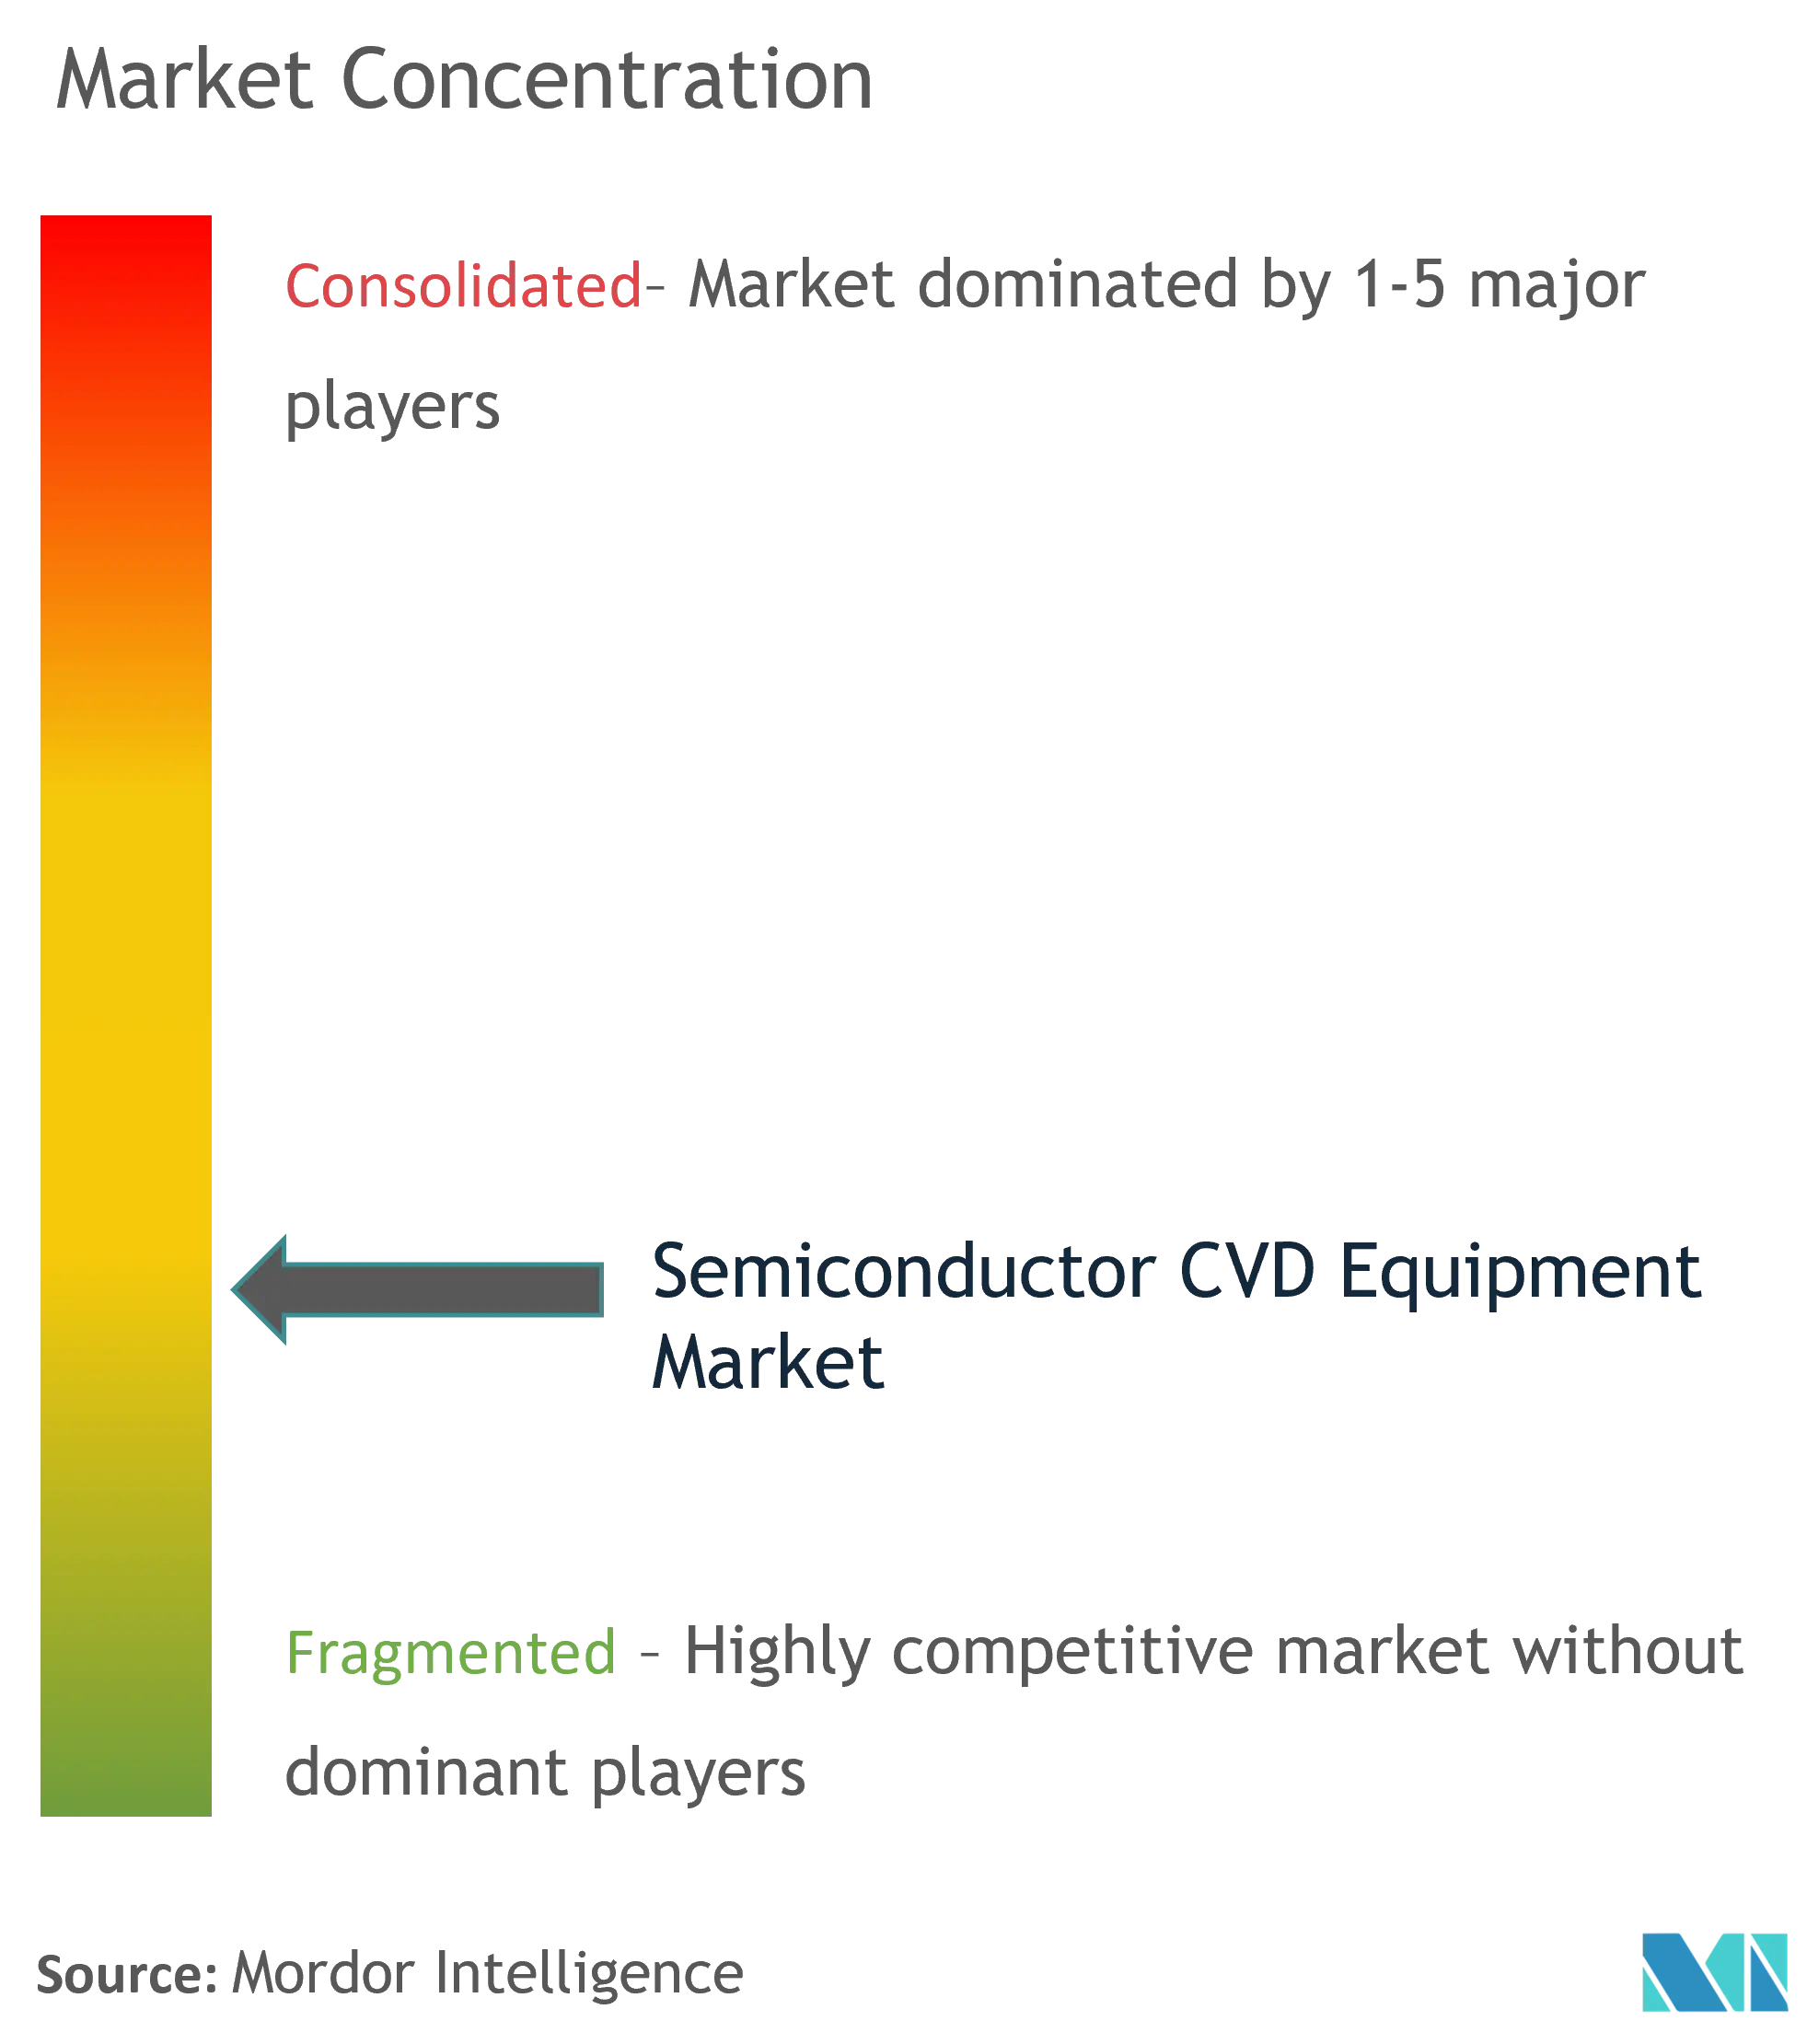 Semiconductor CVD Equipment Market - Market Concentration.png